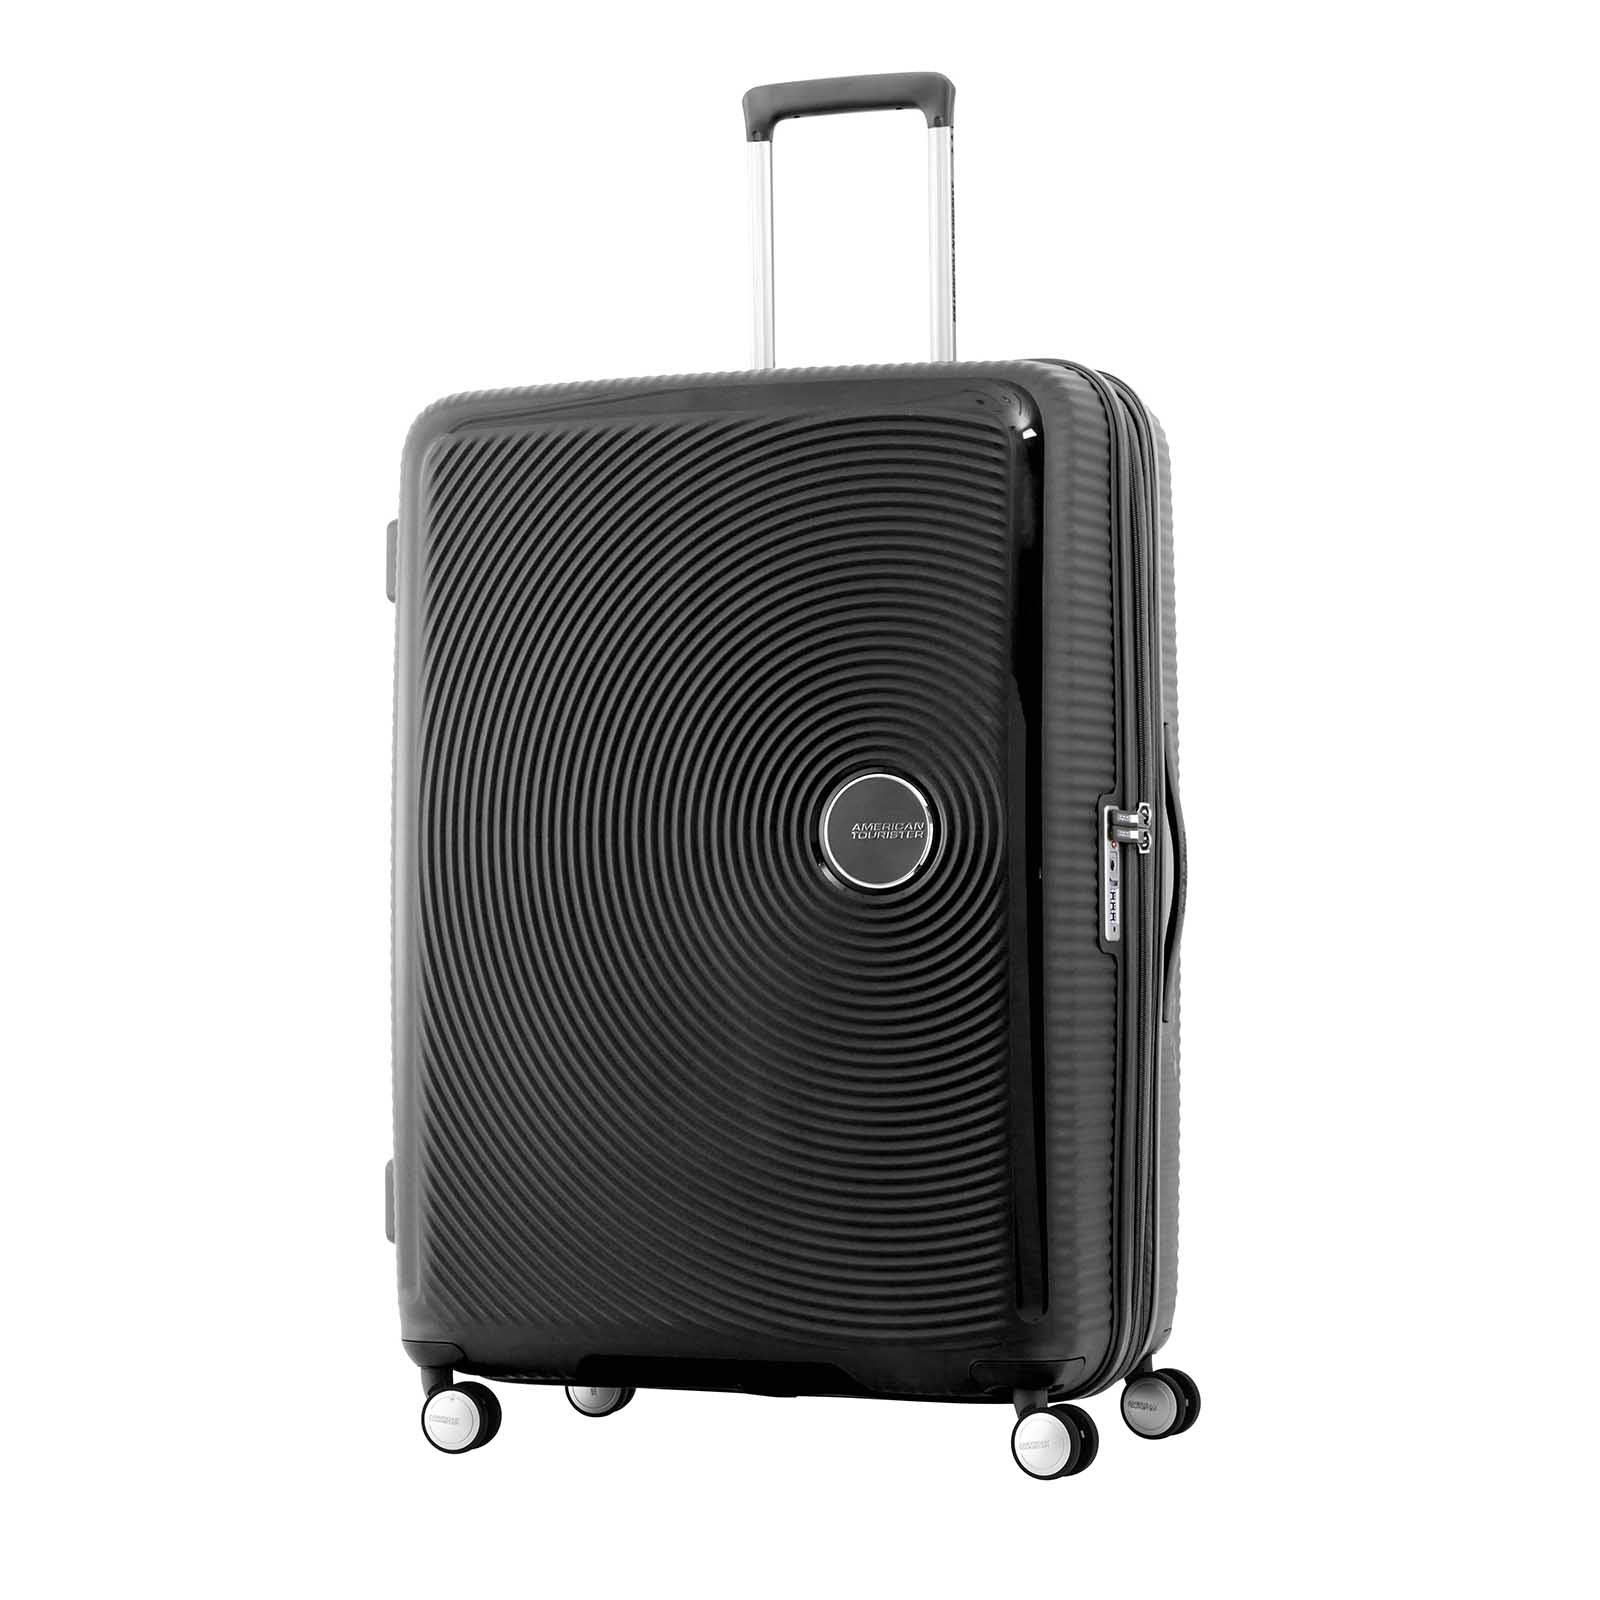 American-Tourister-Curio-2-80cm-Suitcase-Black-Front-Angle